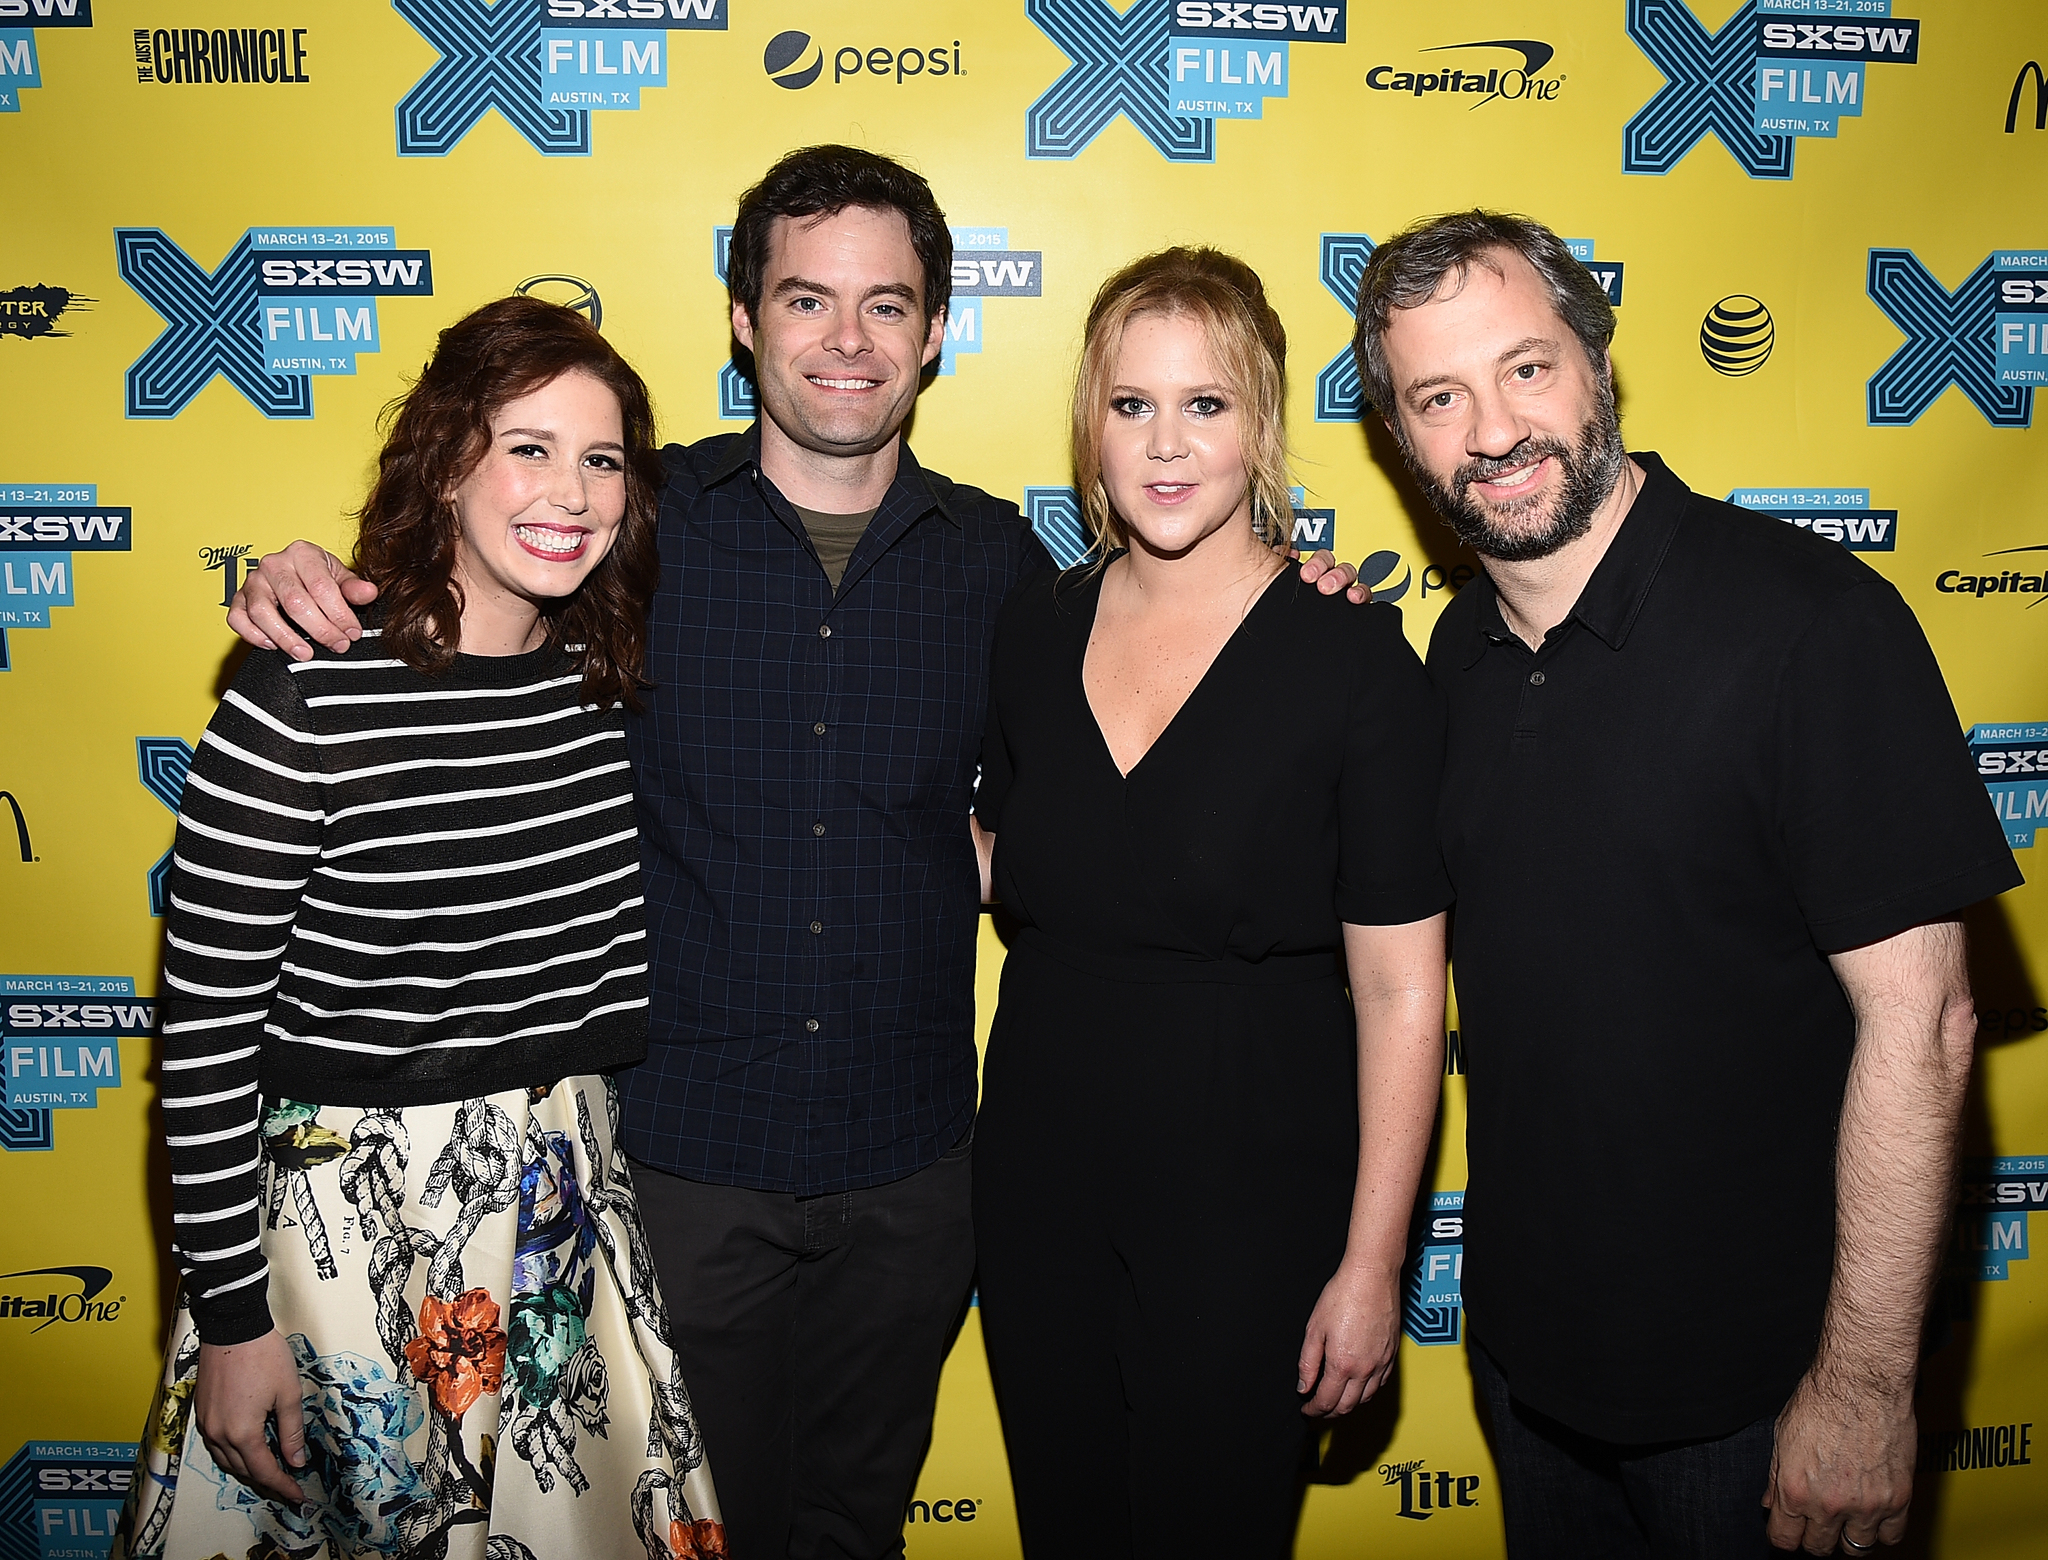 Judd Apatow, Bill Hader, Amy Schumer and Vanessa Bayer at event of Be stabdziu (2015)